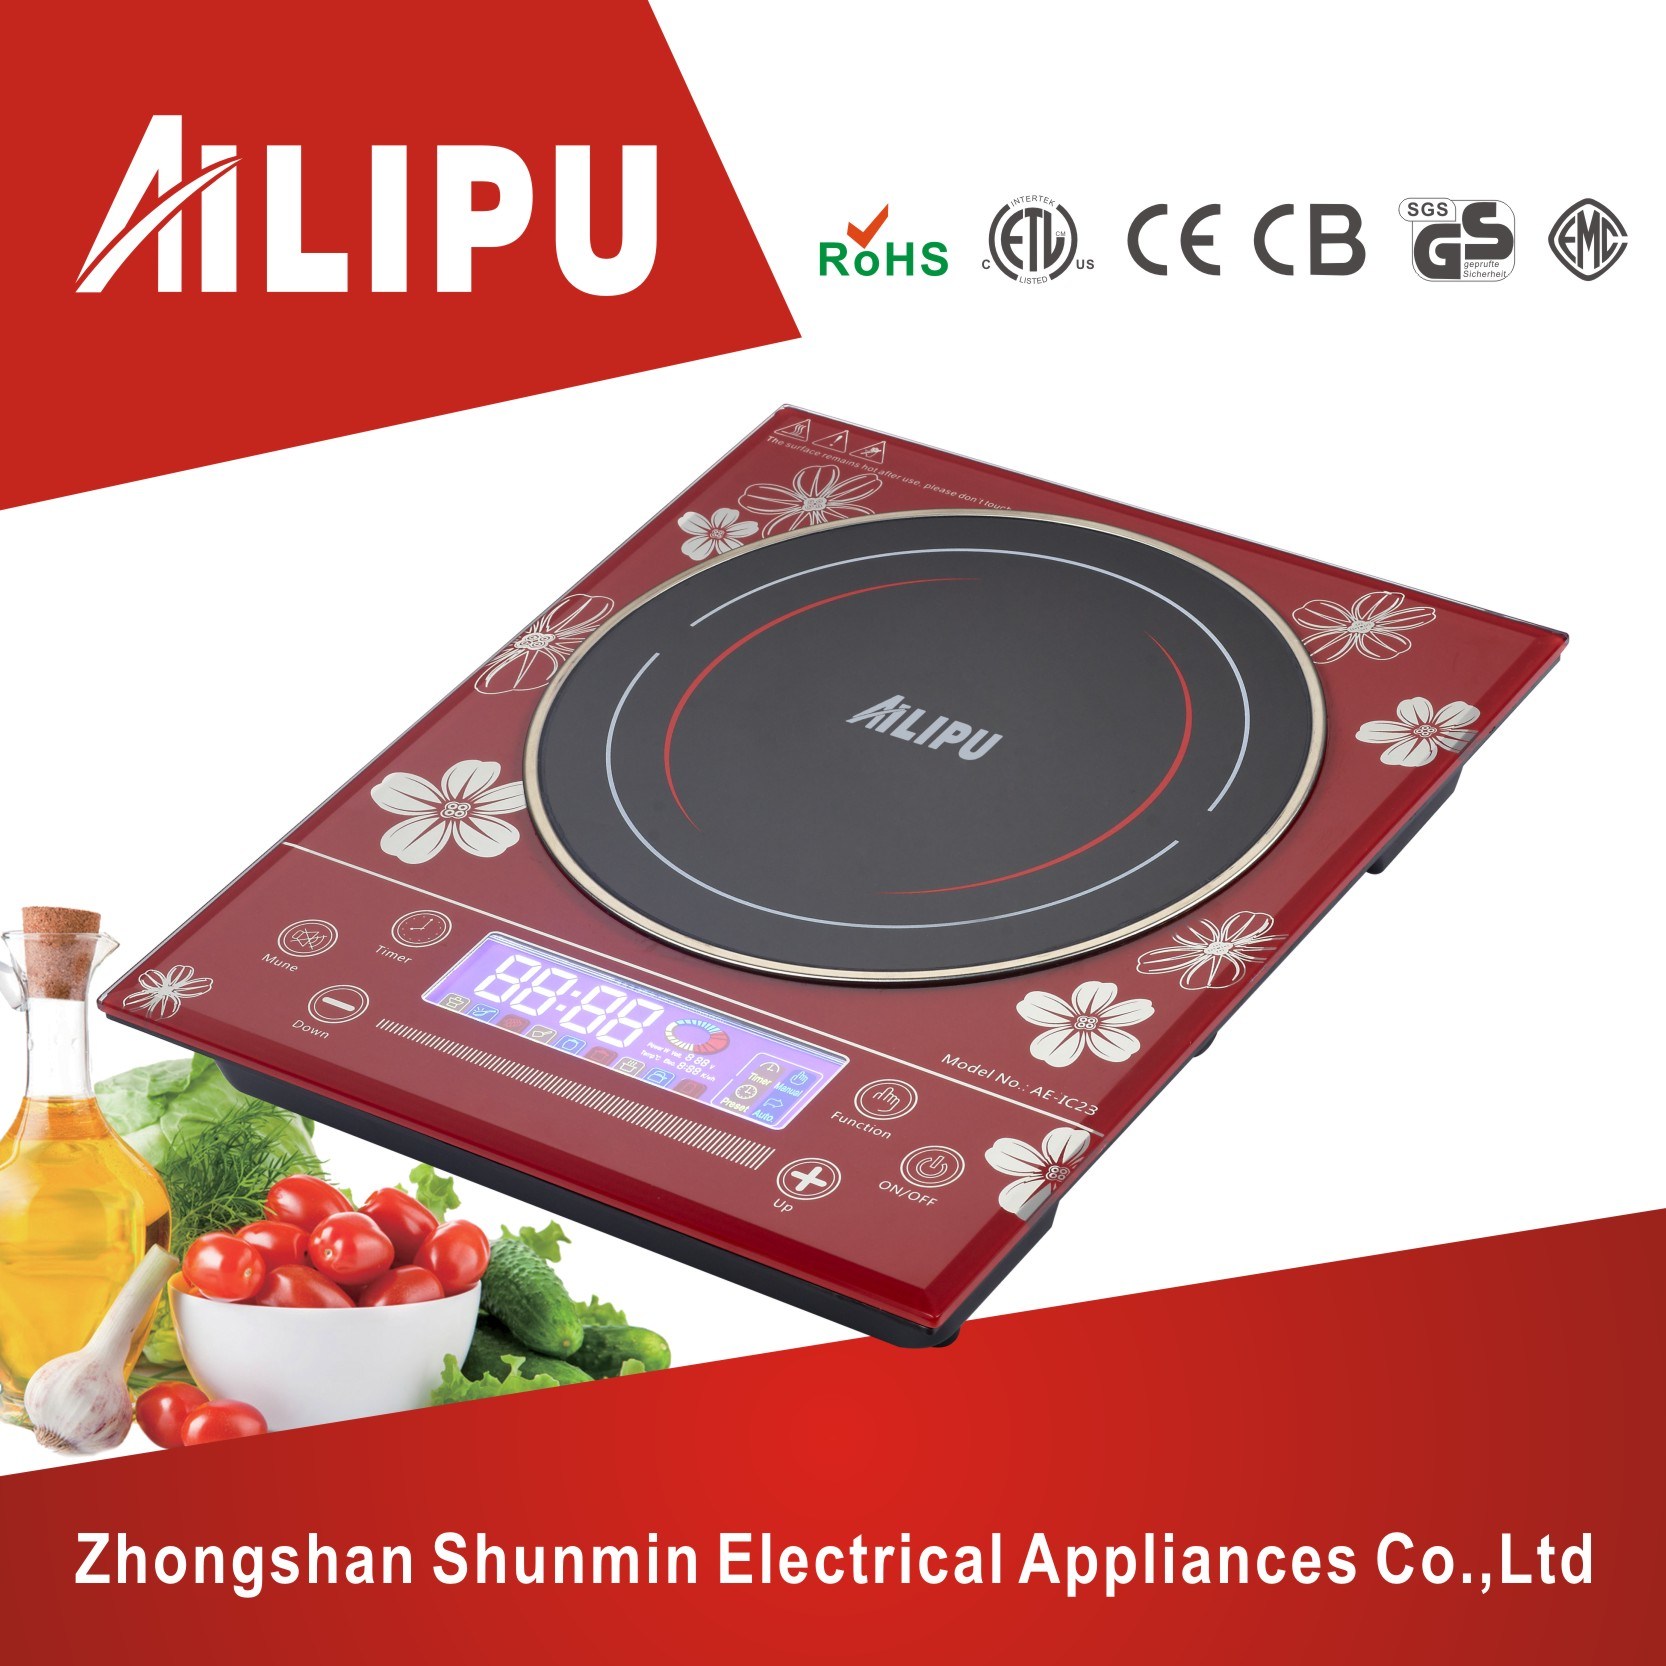 2016 Hot Sale with Talking Function Big Plate LCD Indctuion Cooker 2200W